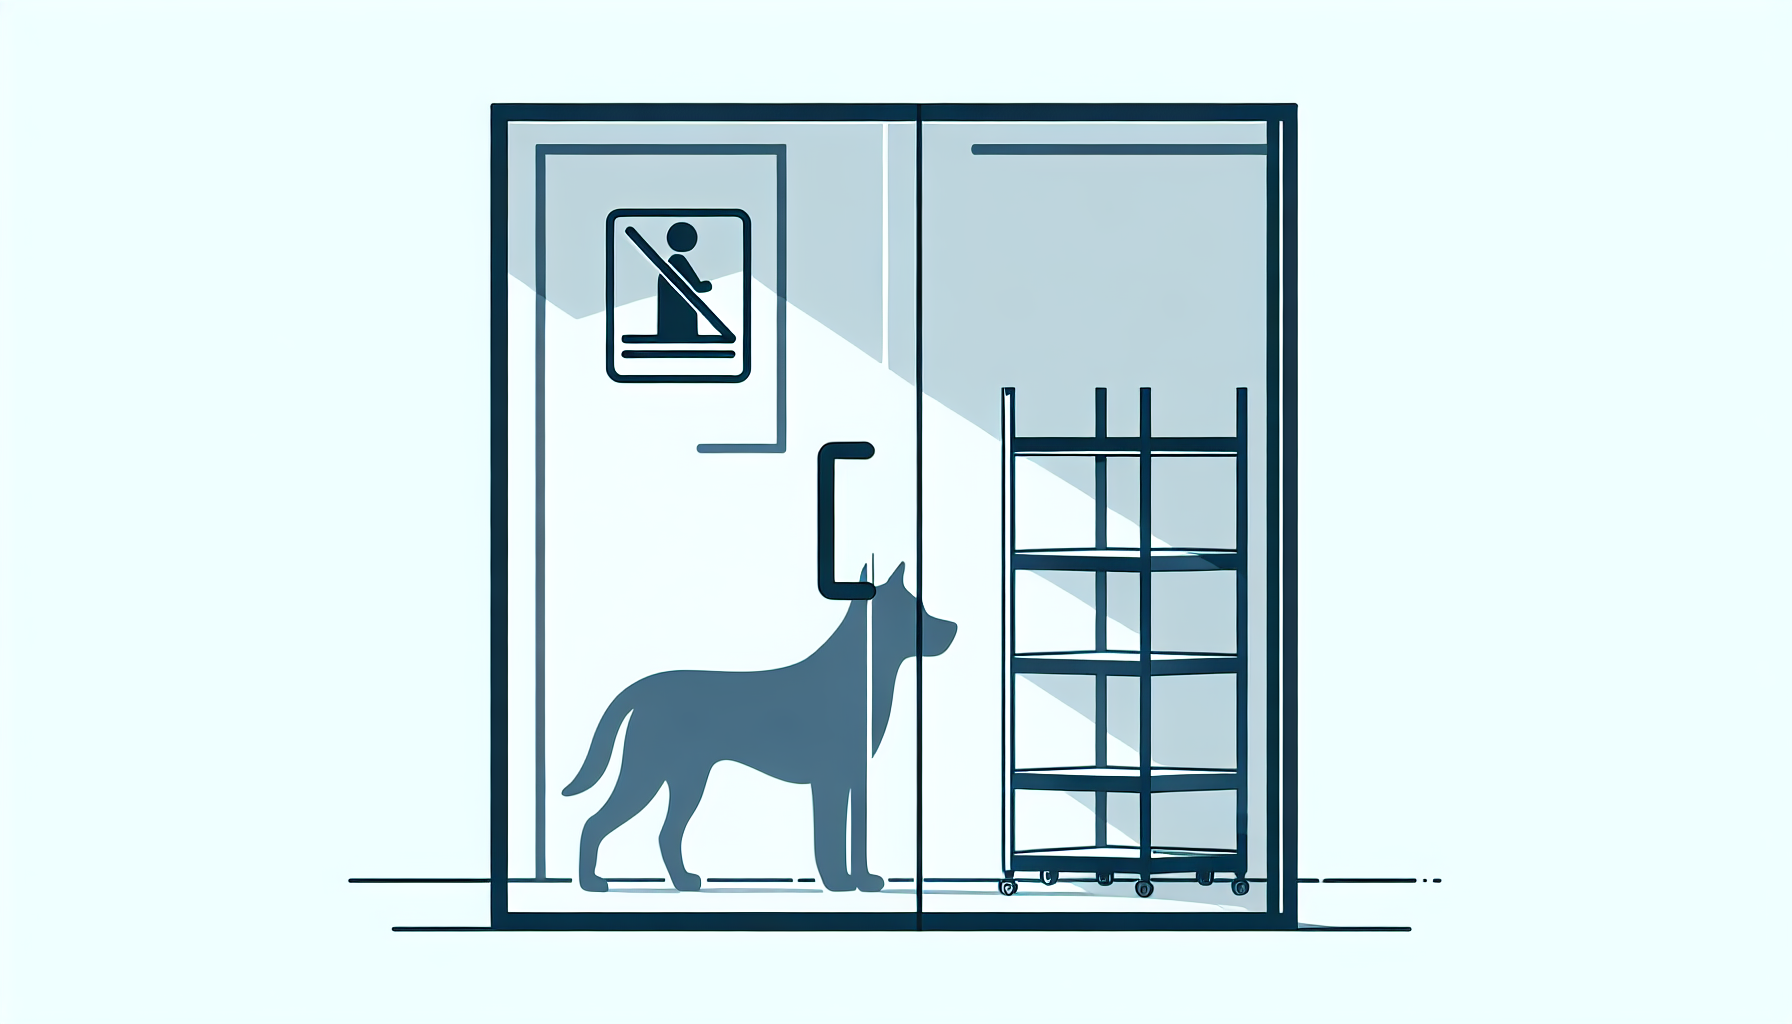 Why Are Dogs Not Allowed In IKEA?